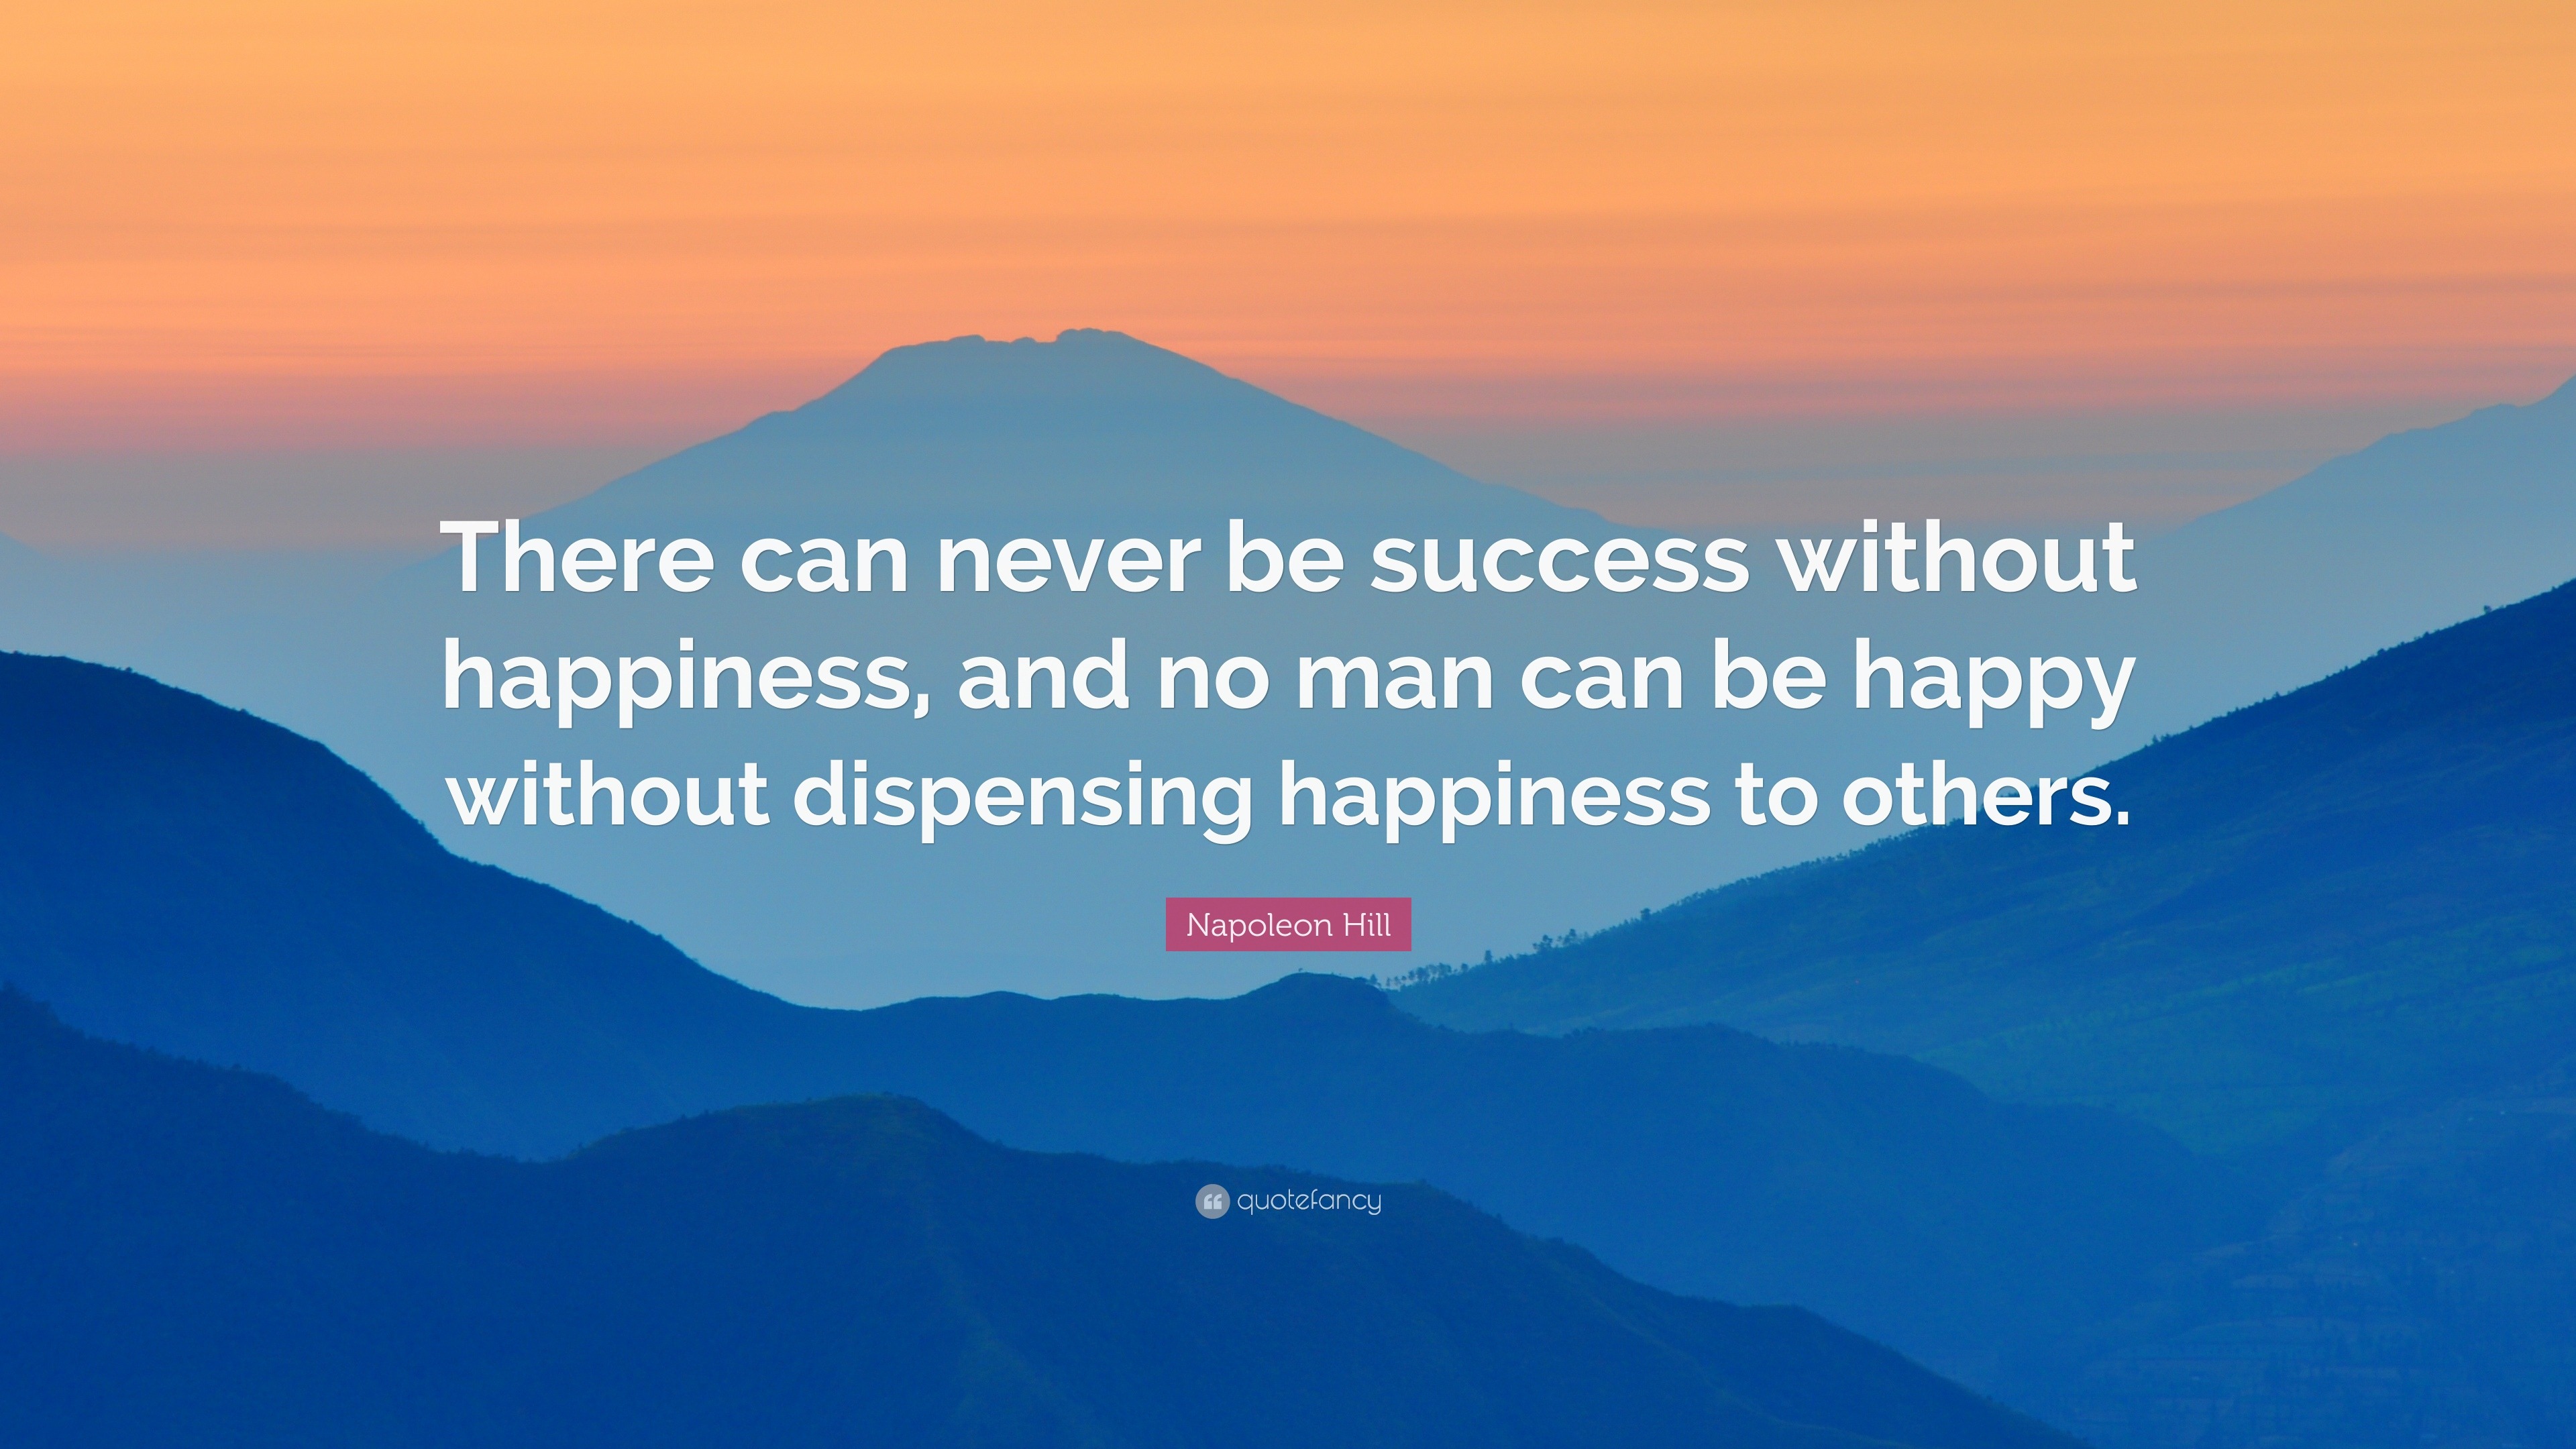 Napoleon Hill Quote “There can never be success without happiness, and